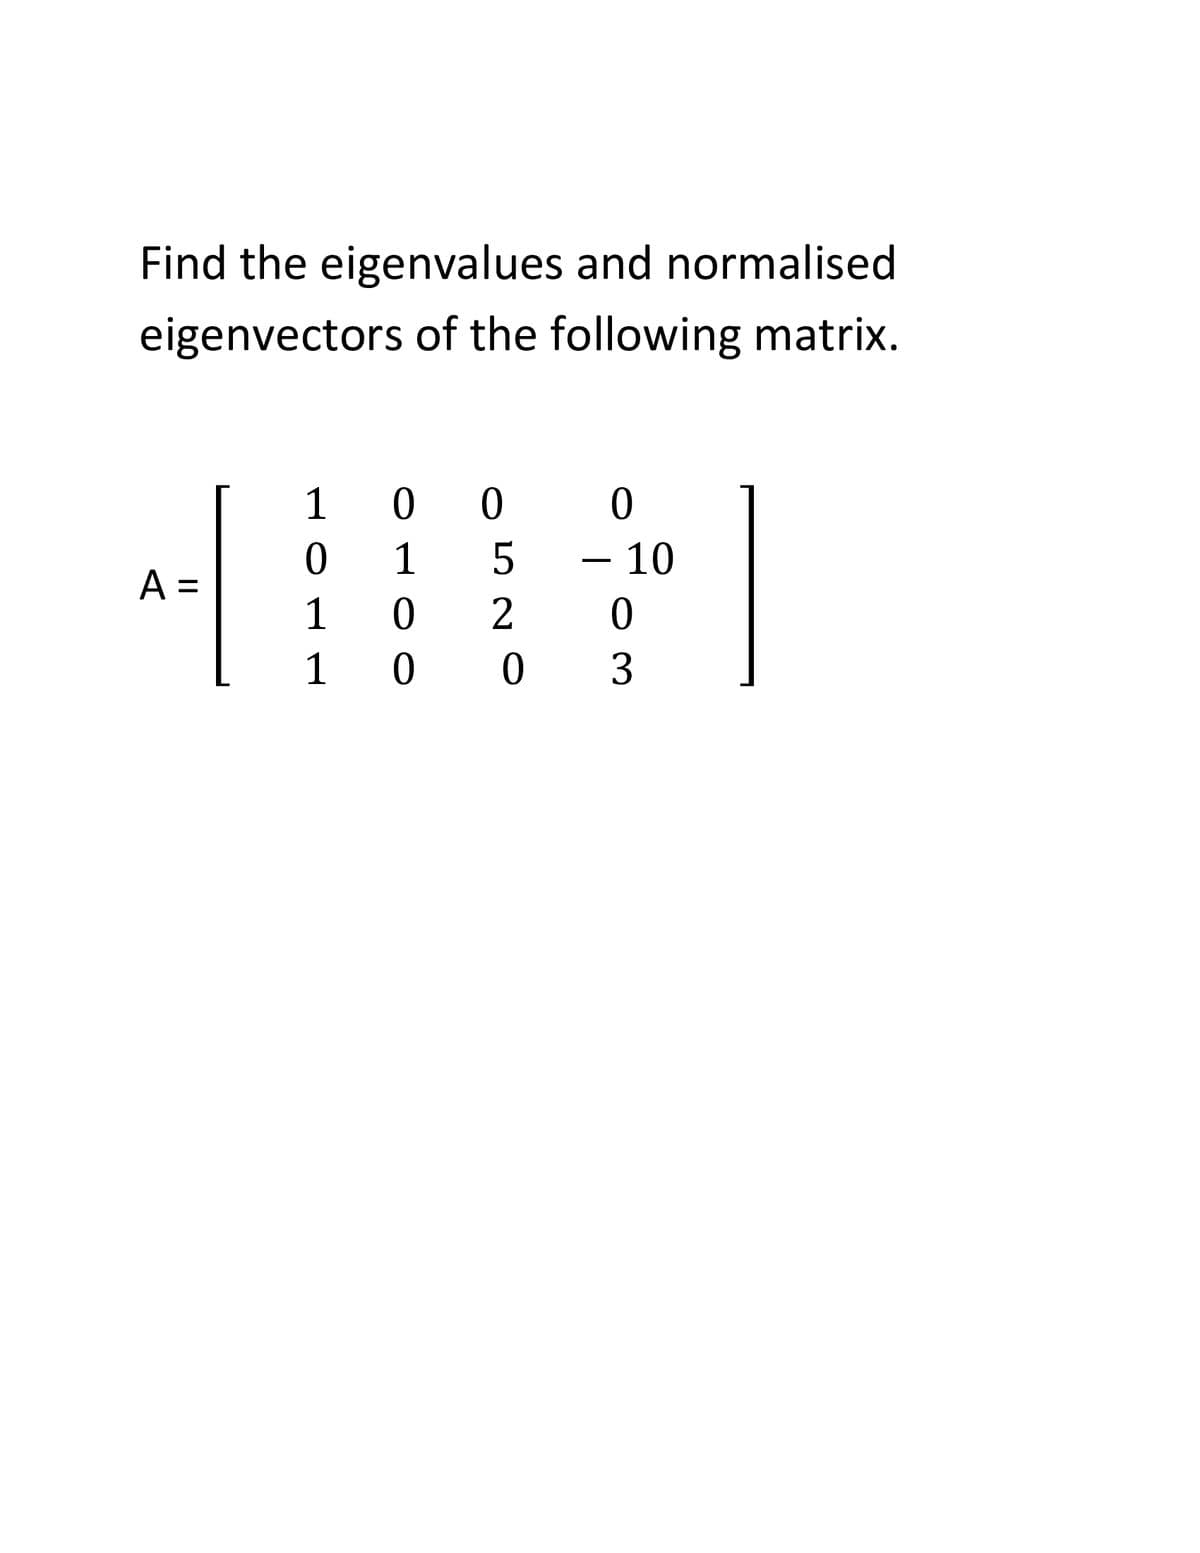 Find the eigenvalues and normalised
eigenvectors of the following matrix.
1
0 0
ㅇ
1
- 10
A =
1
ㅇ
1
0 0 3
